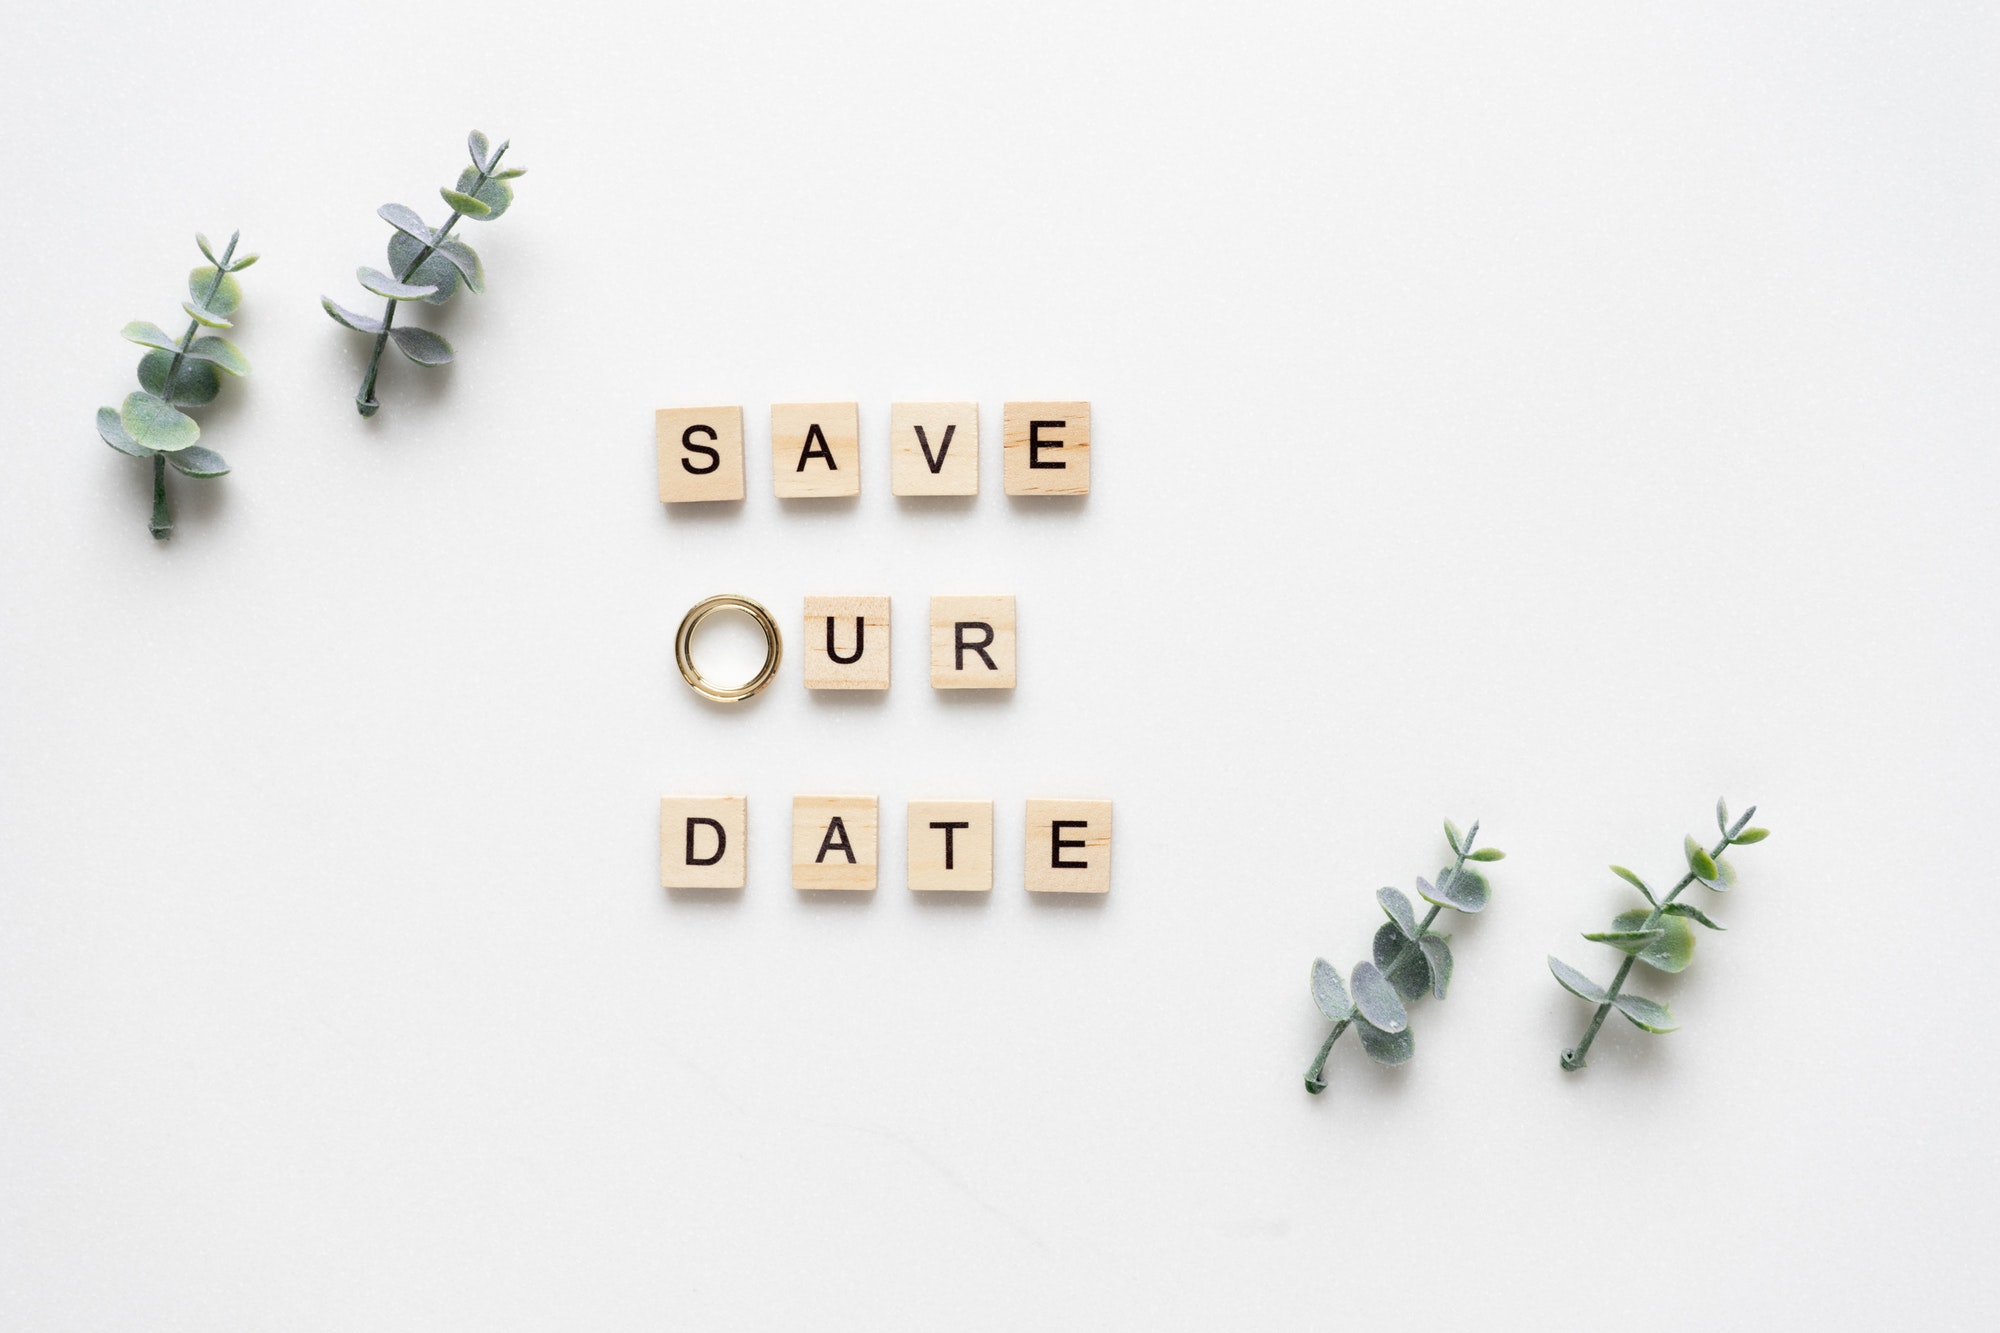 Wooden letters spelling save our date, oregano branches and wed